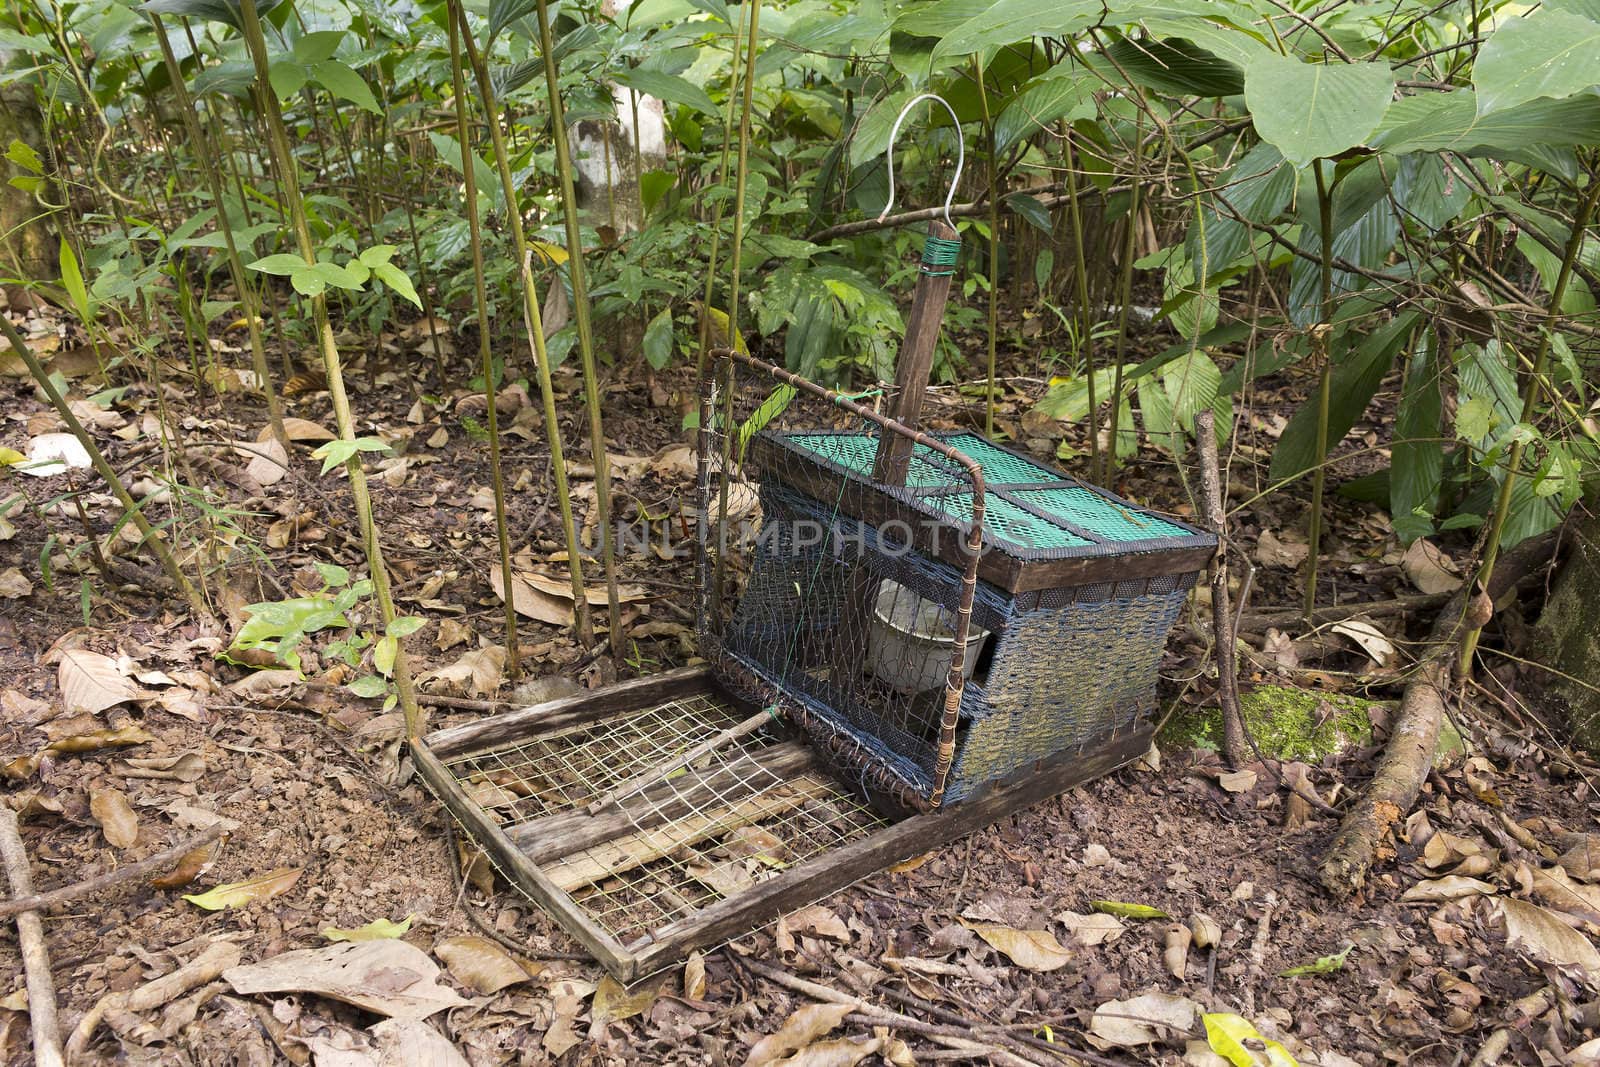 Handmade bird trap (bird name a water rail of the genera Rallus and Amauropsis) in rubber tree garden at the southern part of Thailand